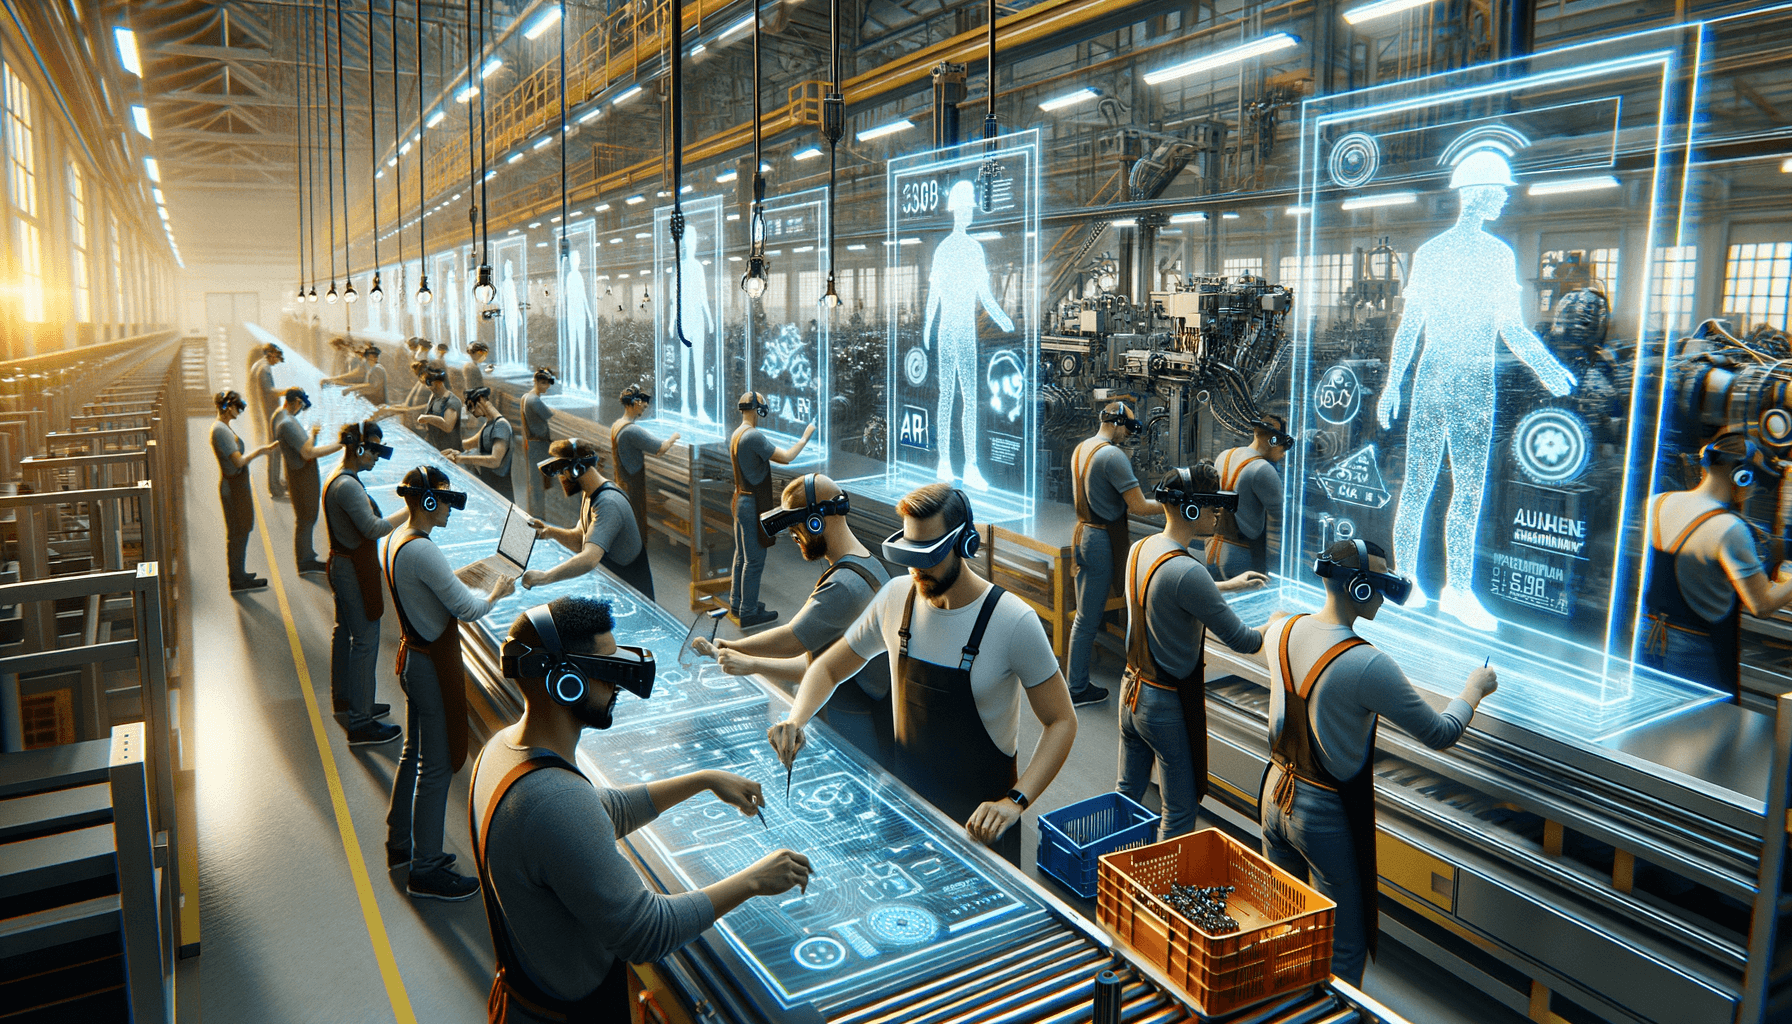 "Revolutionizing Manufacturing: Cutting-Edge AR & VR Technologies Boost Efficiency and Safety on the Shop Floor"